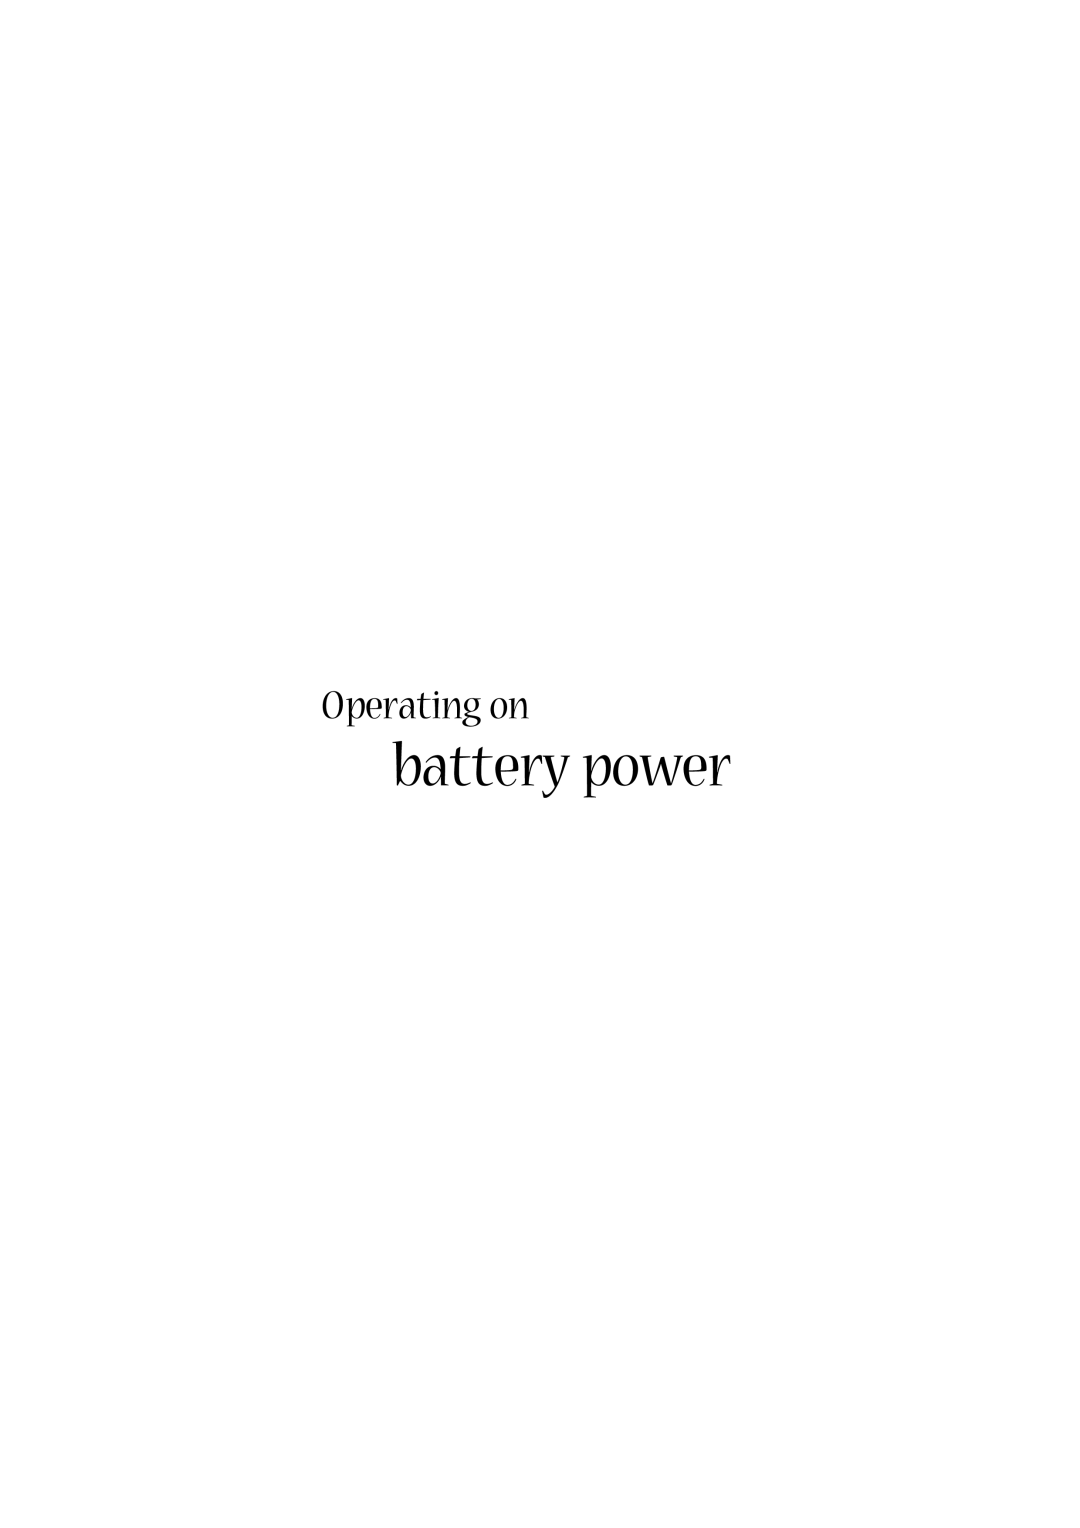 Acer 2010 manual battery power, Operating on 